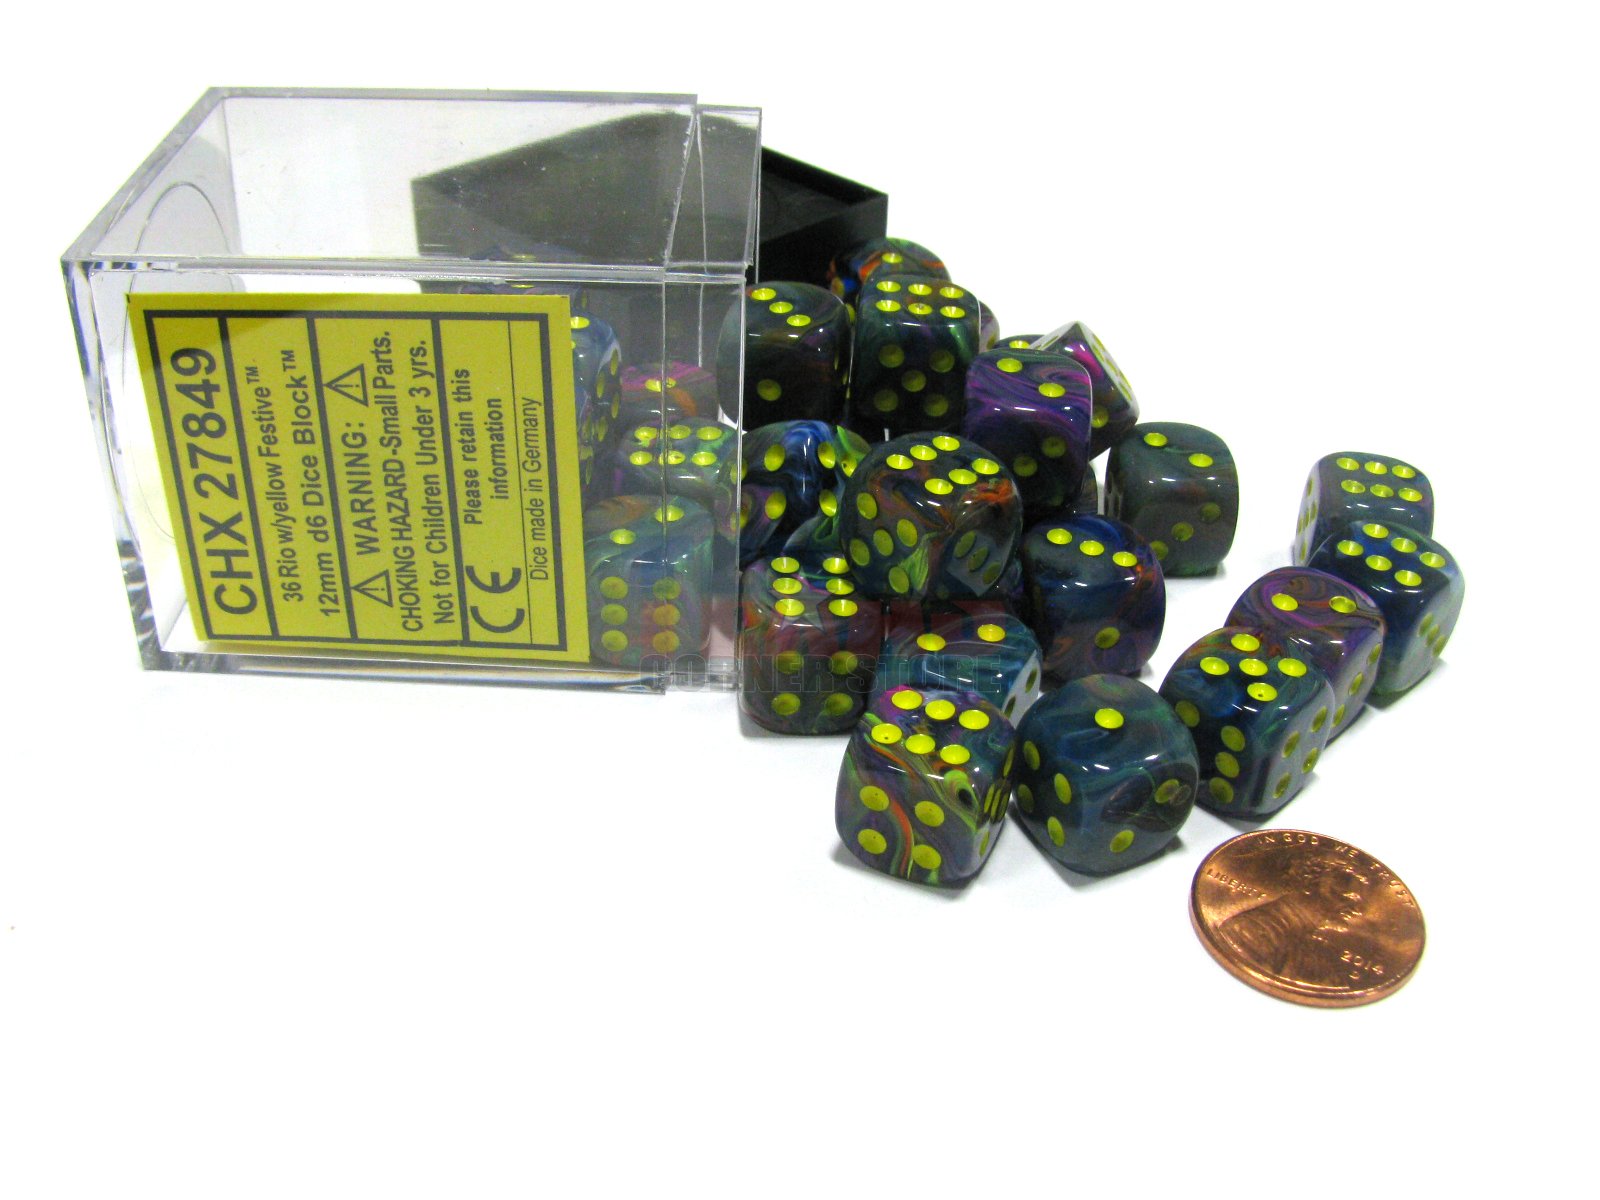 Chessex: D6 Festive™ DICE SET - 16MM | North Valley Games